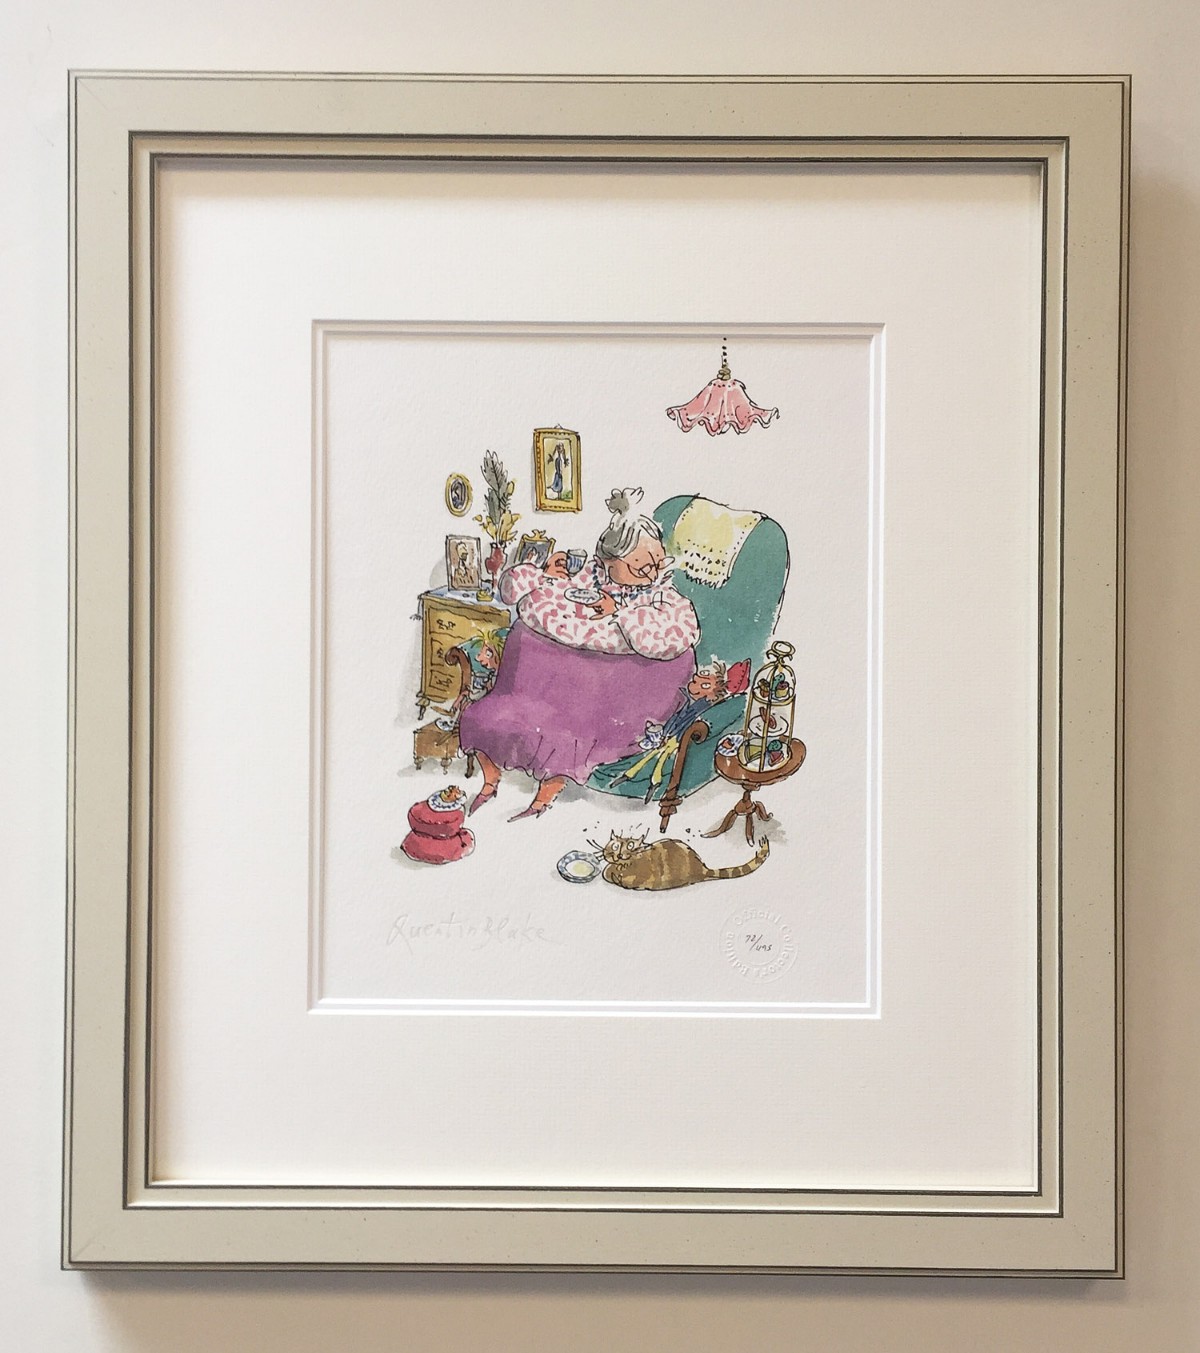 G is for Grandma by Quentin Blake